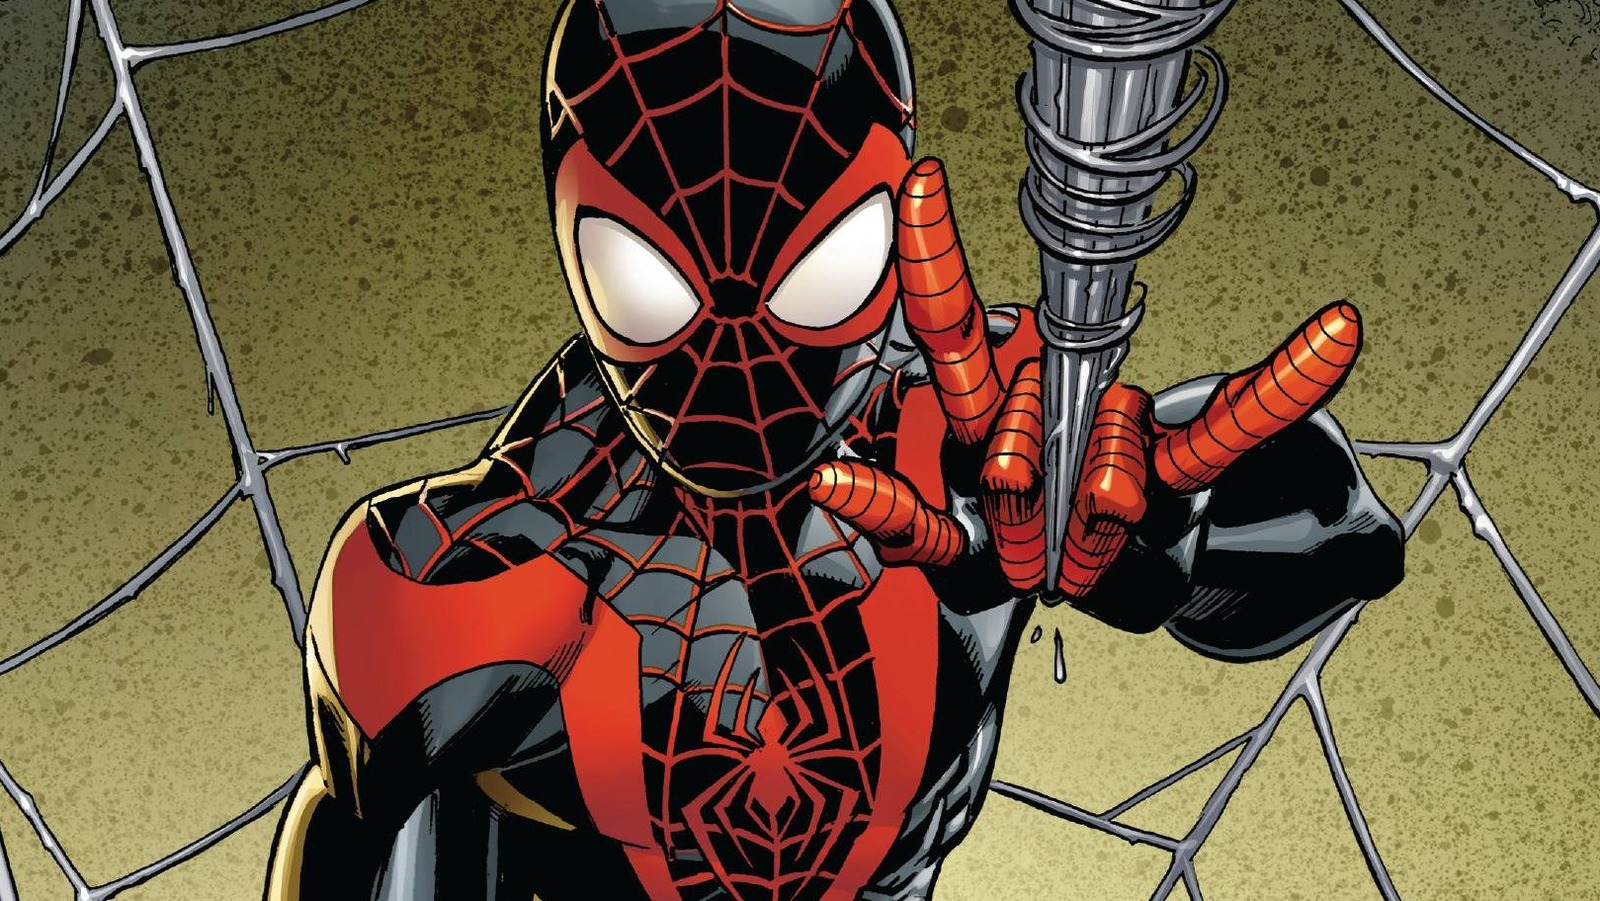 Spider-Man: Miles Morales in the main Marvel Universe is